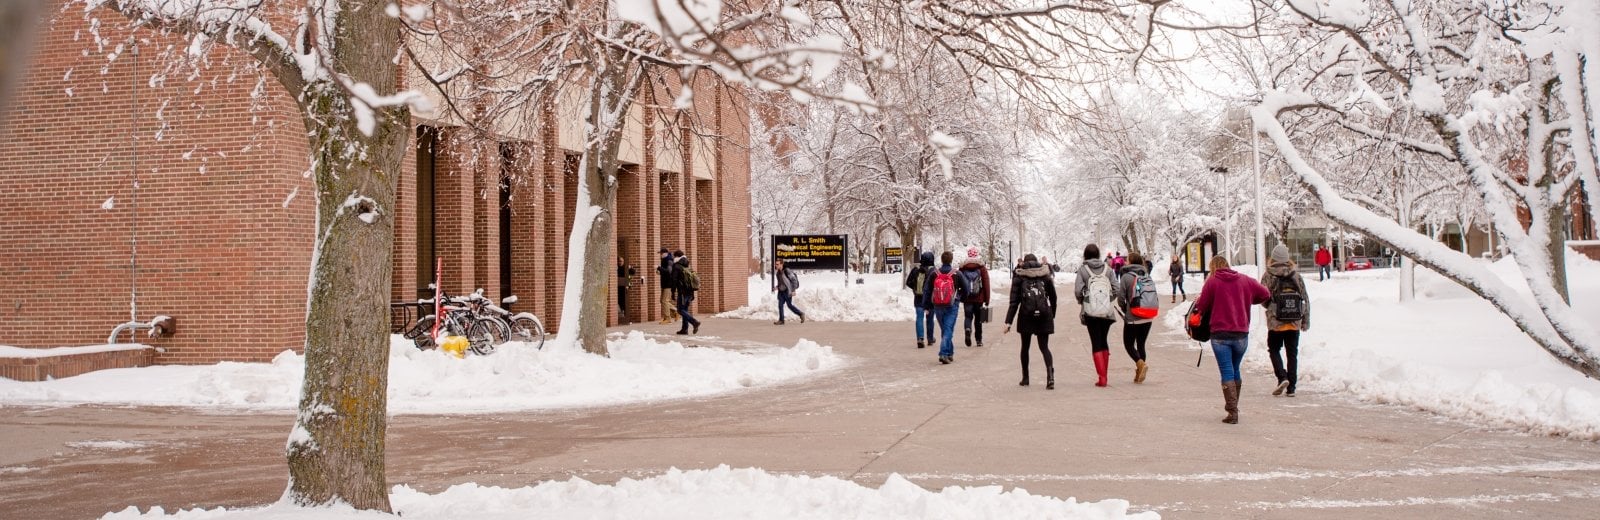 Campus during the winter.